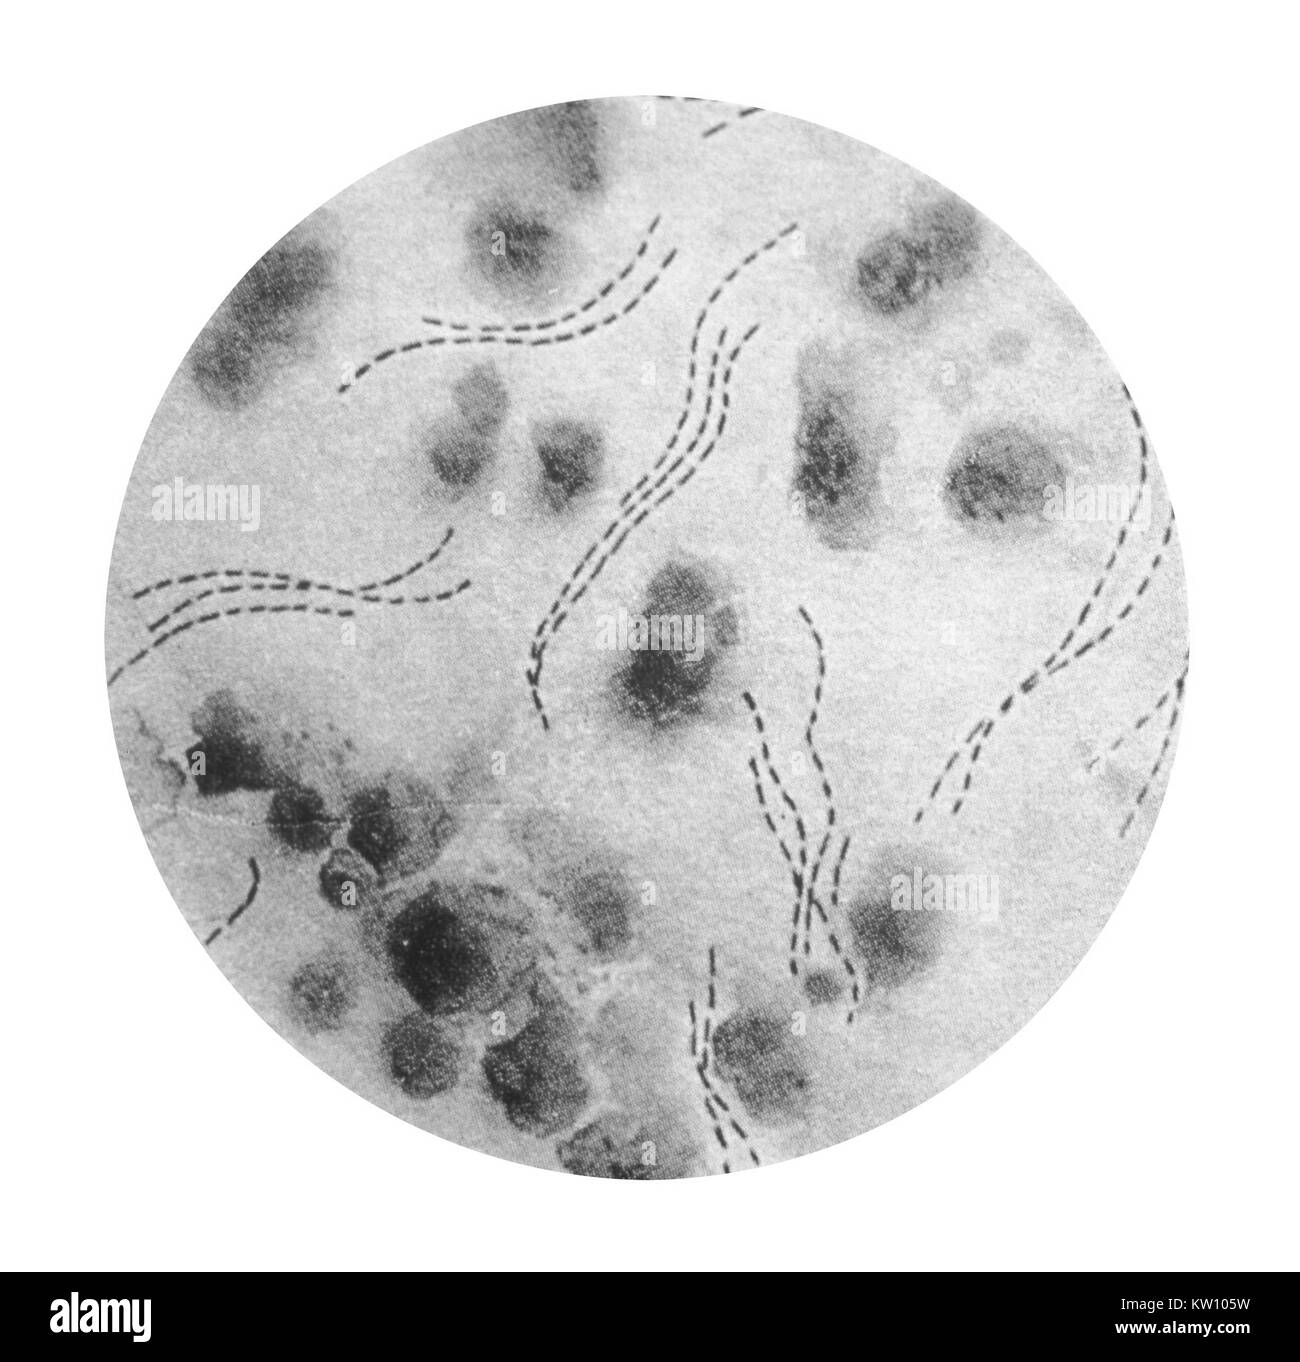 This illustration depicts a photomicrographic view of Haemophilus ducreyi bacteria stained using gentian violet. H. ducreyi causes chancroid, a highly contagious sexually transmitted disease that begins with the formation of painful open sores on the genitals. Image courtesy CDC, 1979. Stock Photo